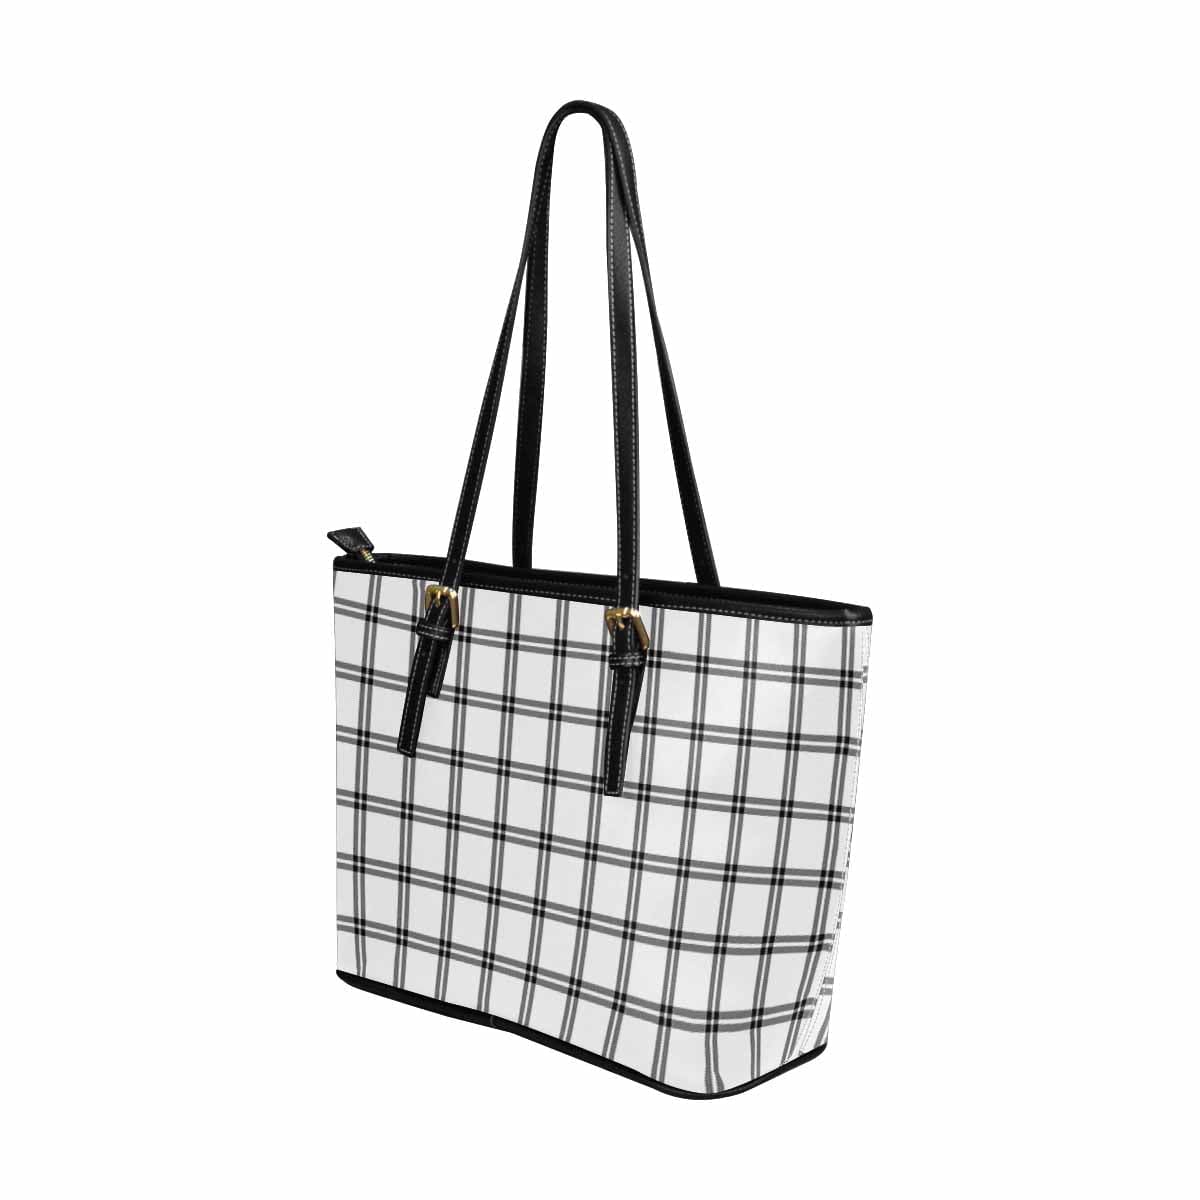 Large Leather Tote Shoulder Bag - Buffalo Plaid Black And White - Bags | Leather